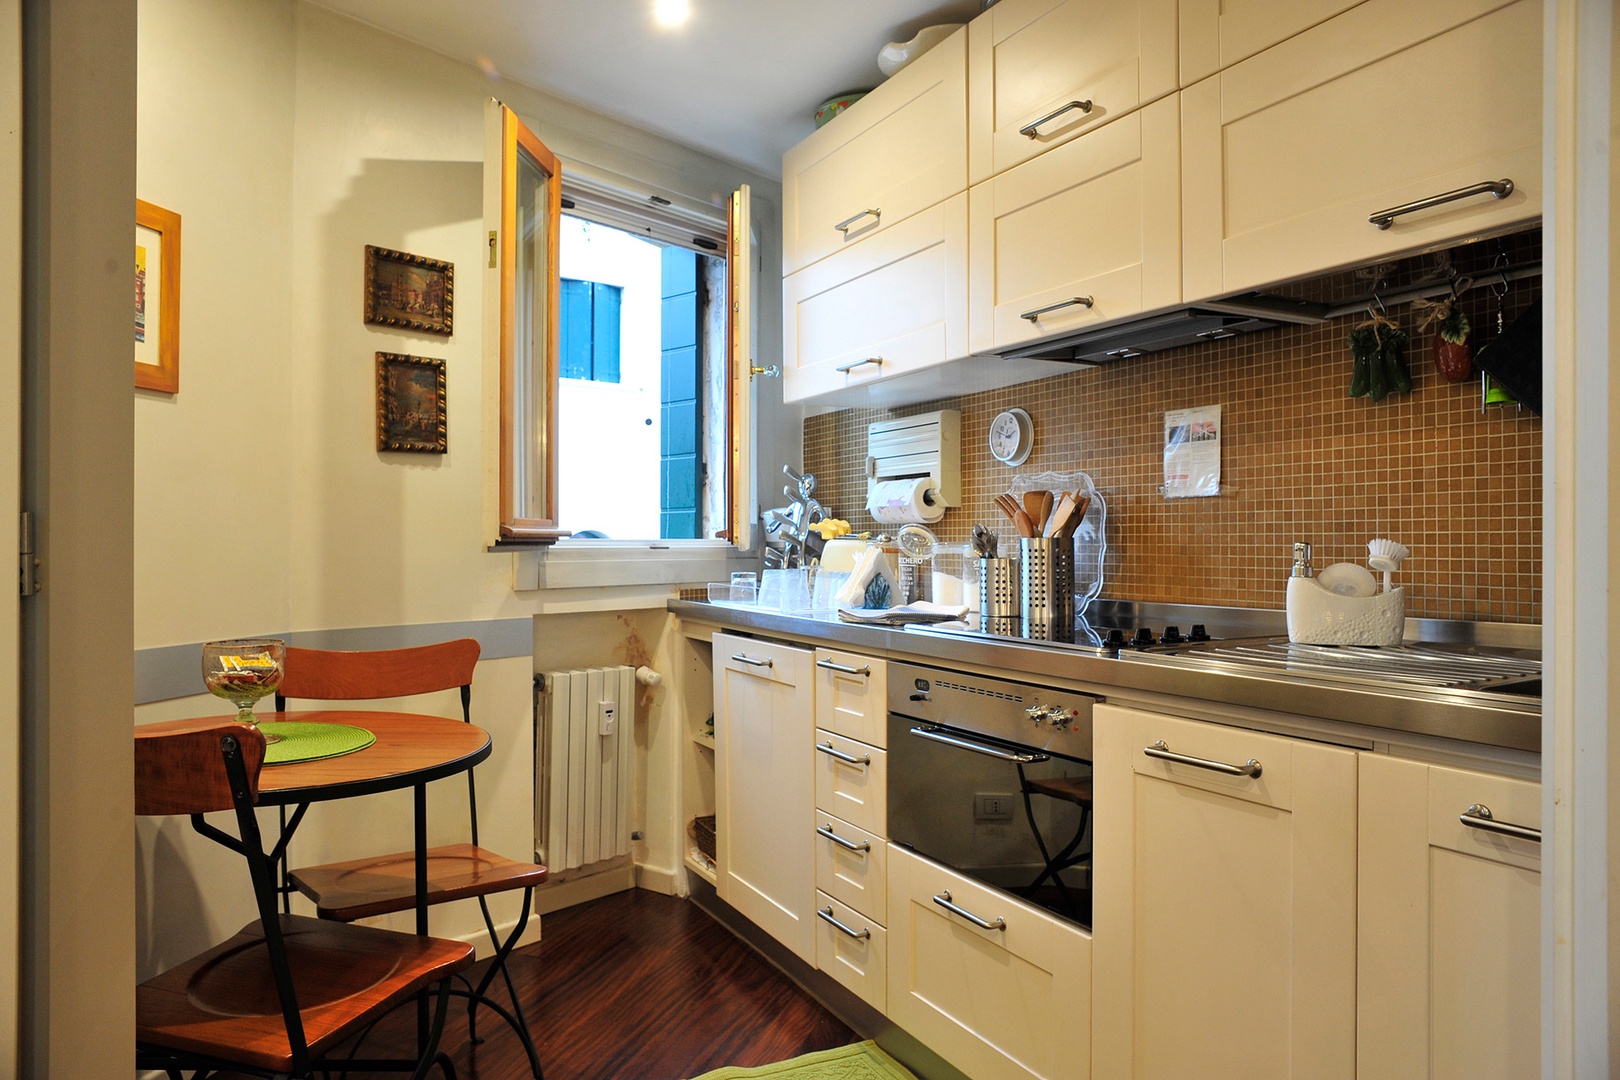 The small complete kitchen of Serenata has a breakfast table and pretty view out the window.